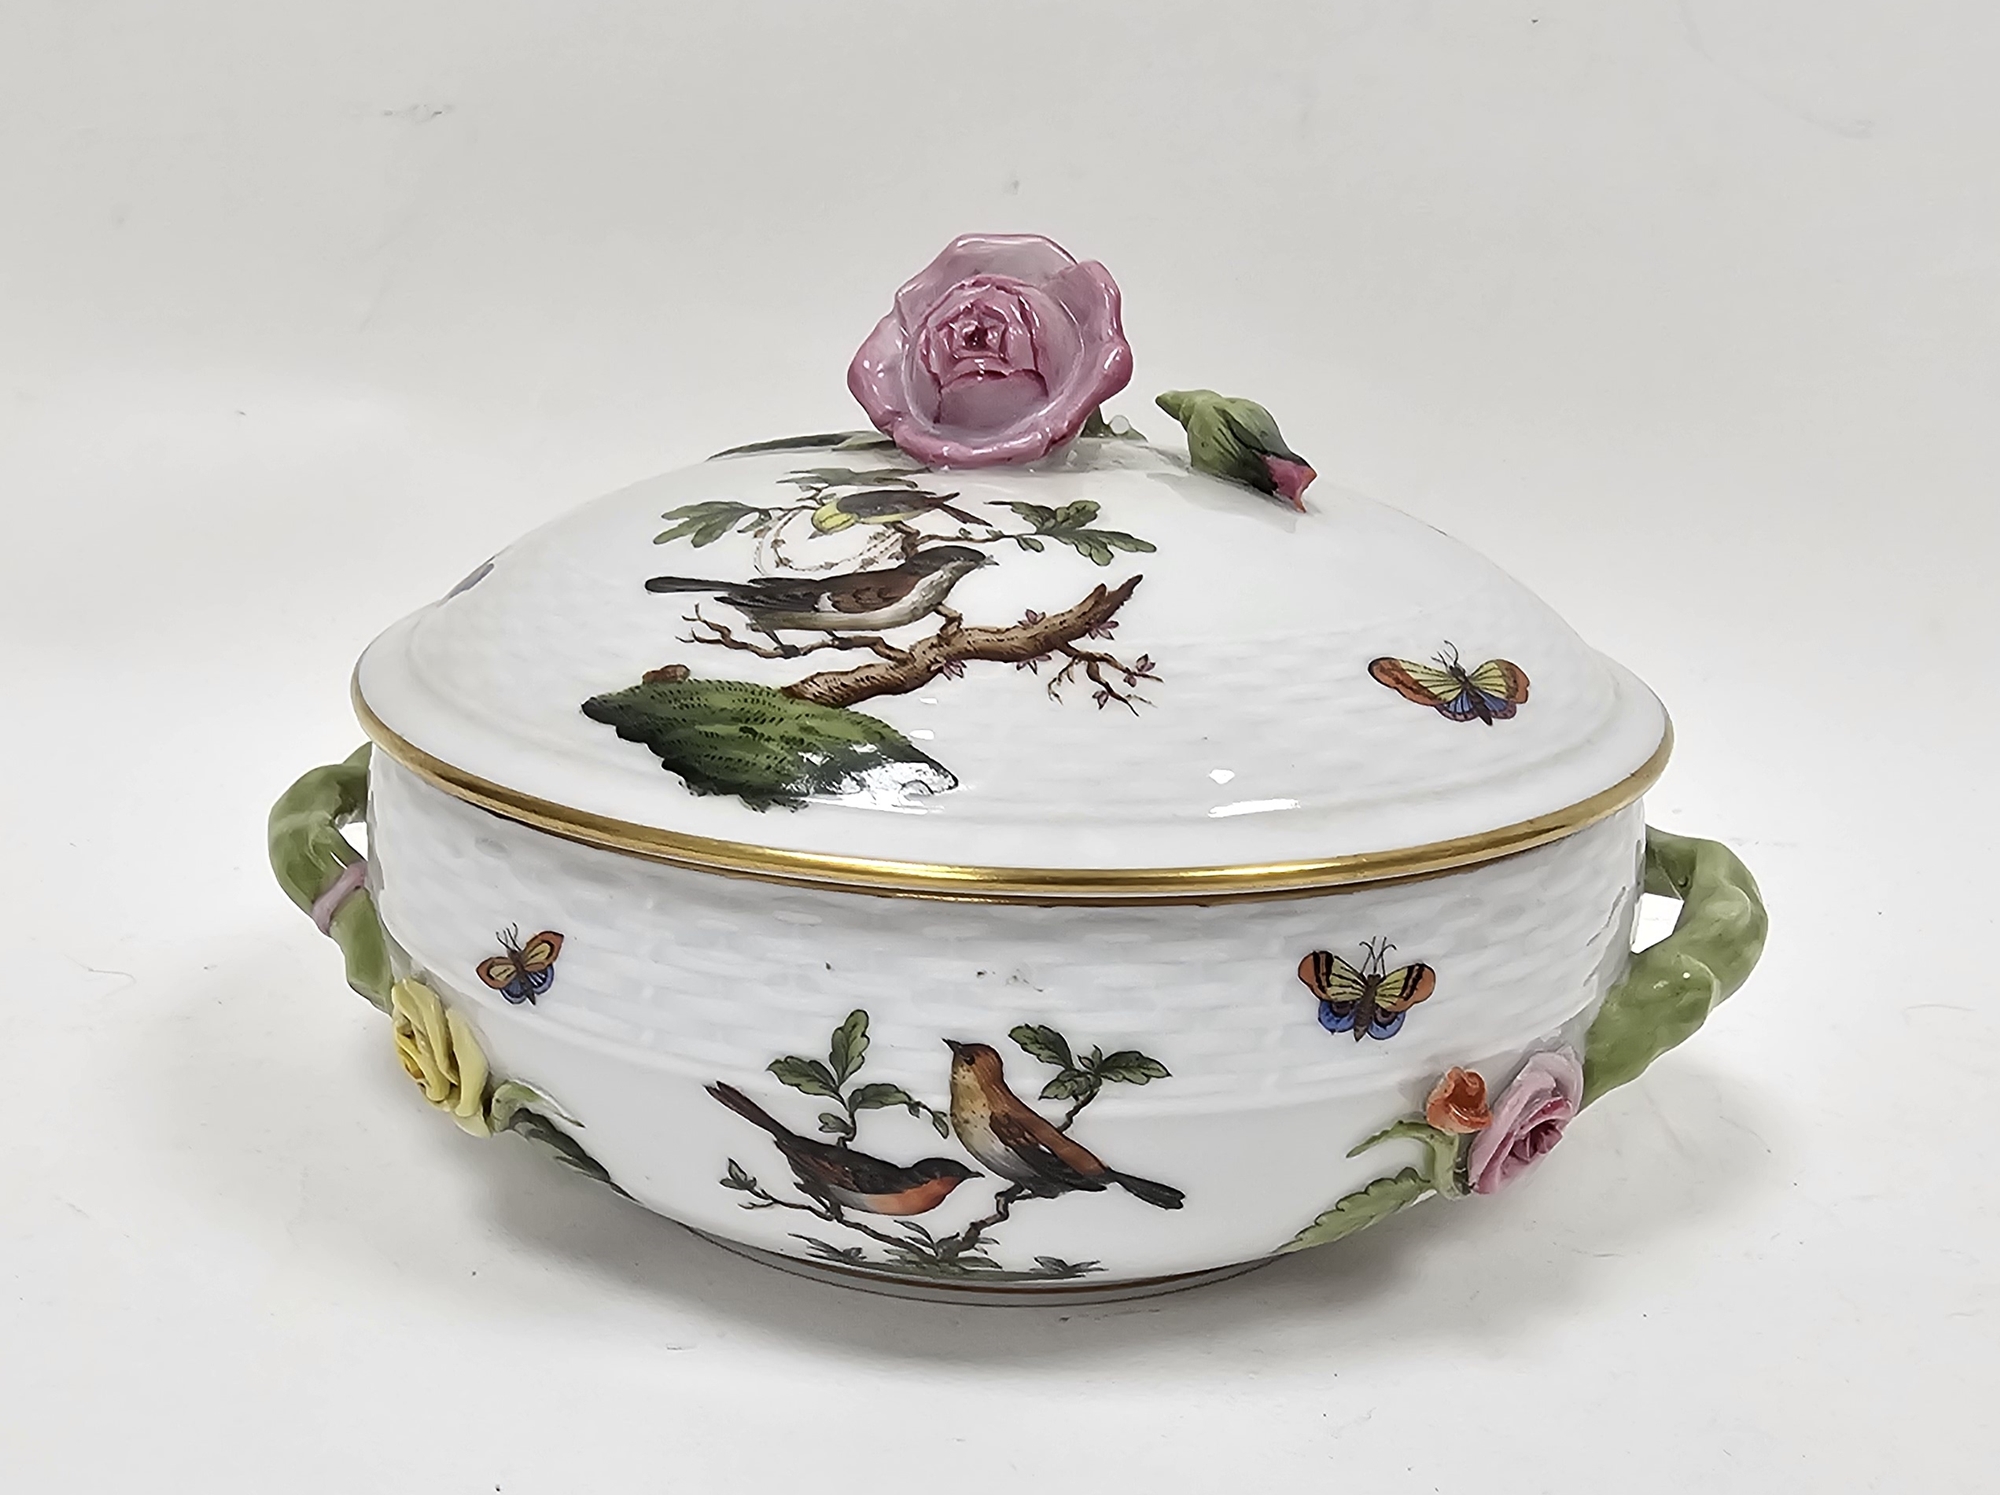 20th century Herend Rothschild Birds pattern circular vegetable tureen and cover, with branch